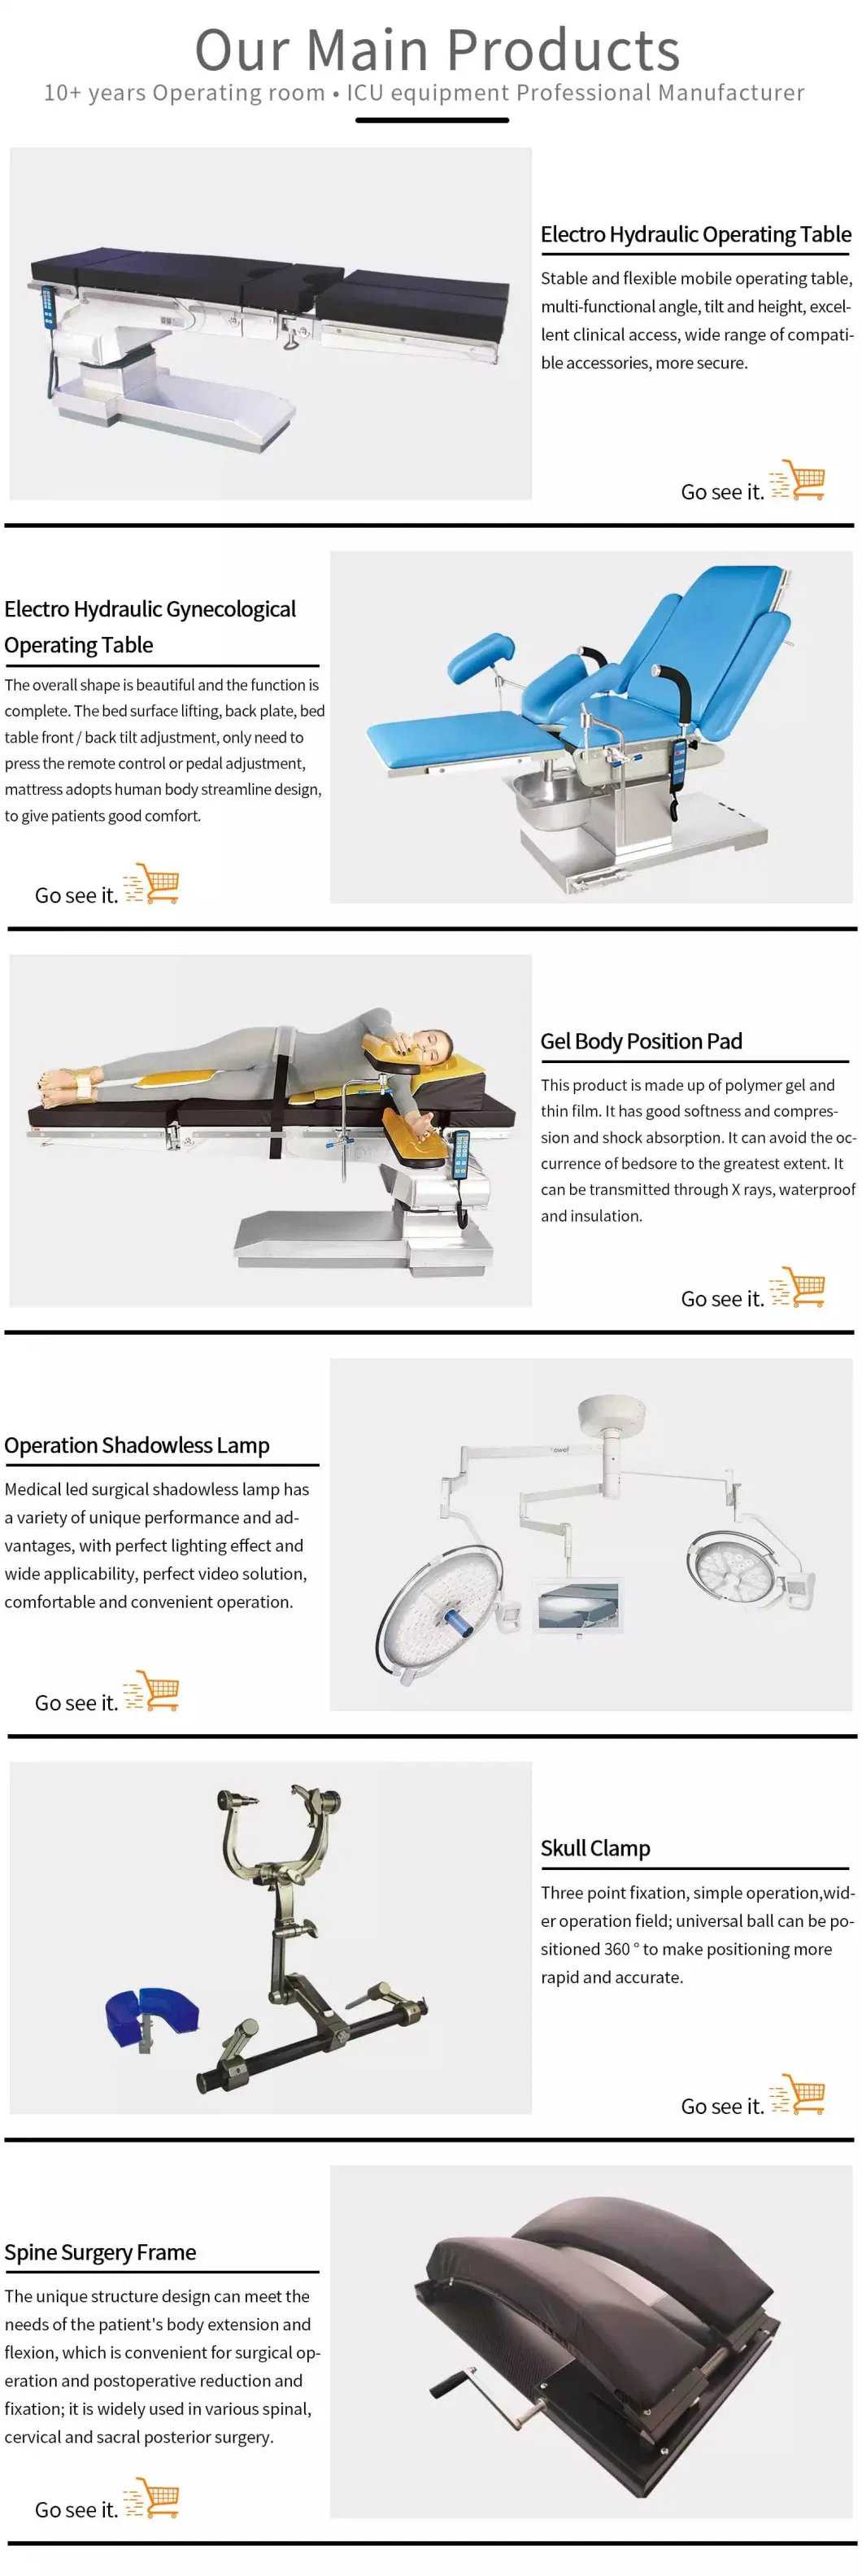 G-Arm Fluoroscopy Operating Table Imaging C-Arm Compatible Operating Table Cost